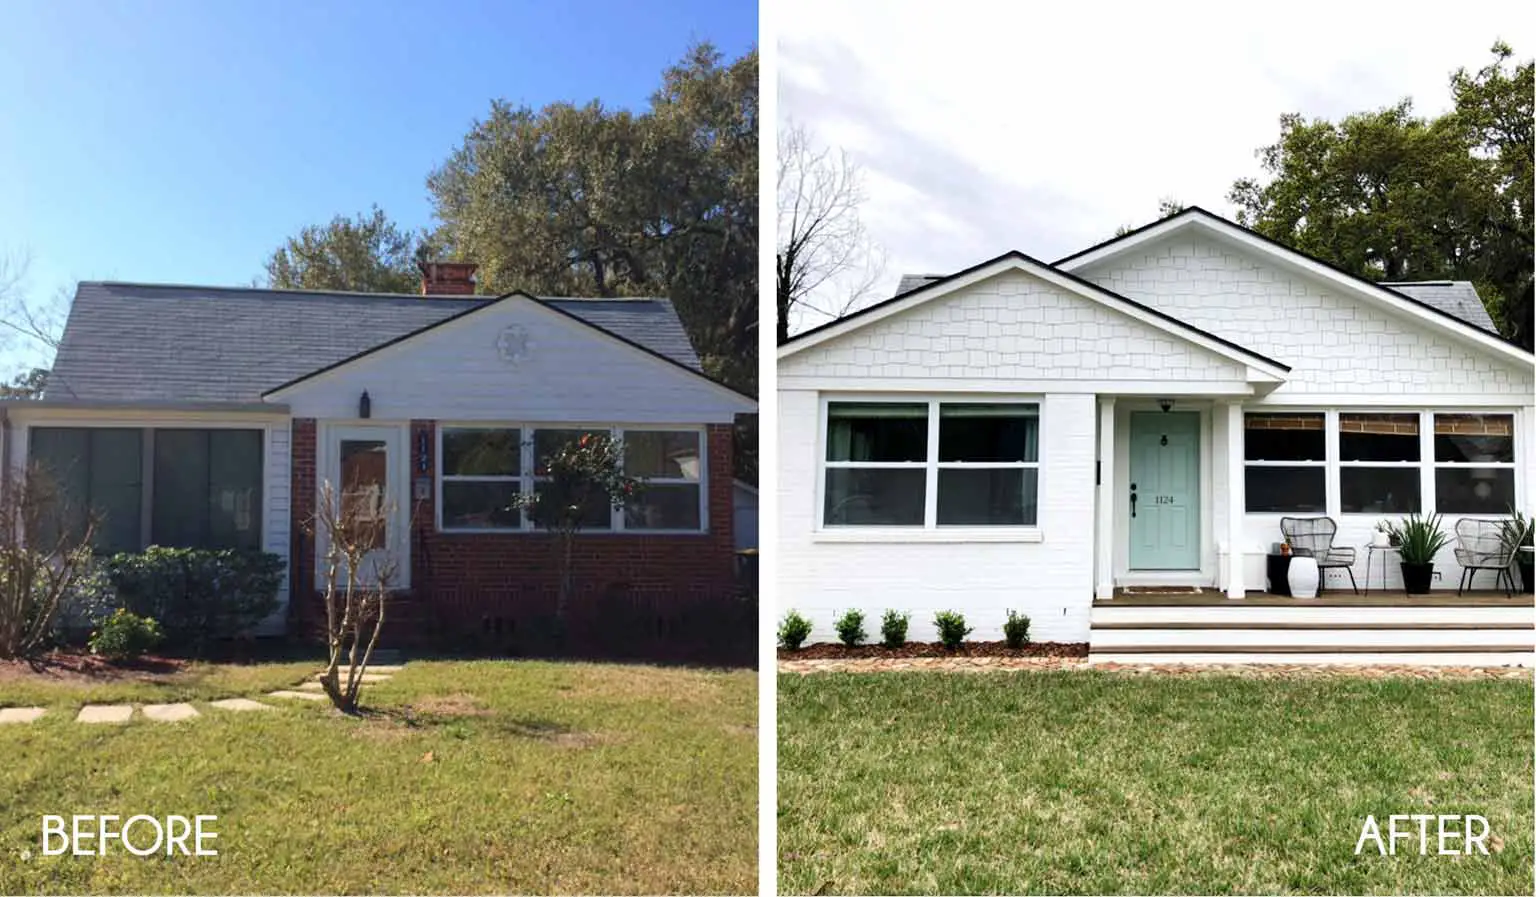 Before and After views of our home exterior